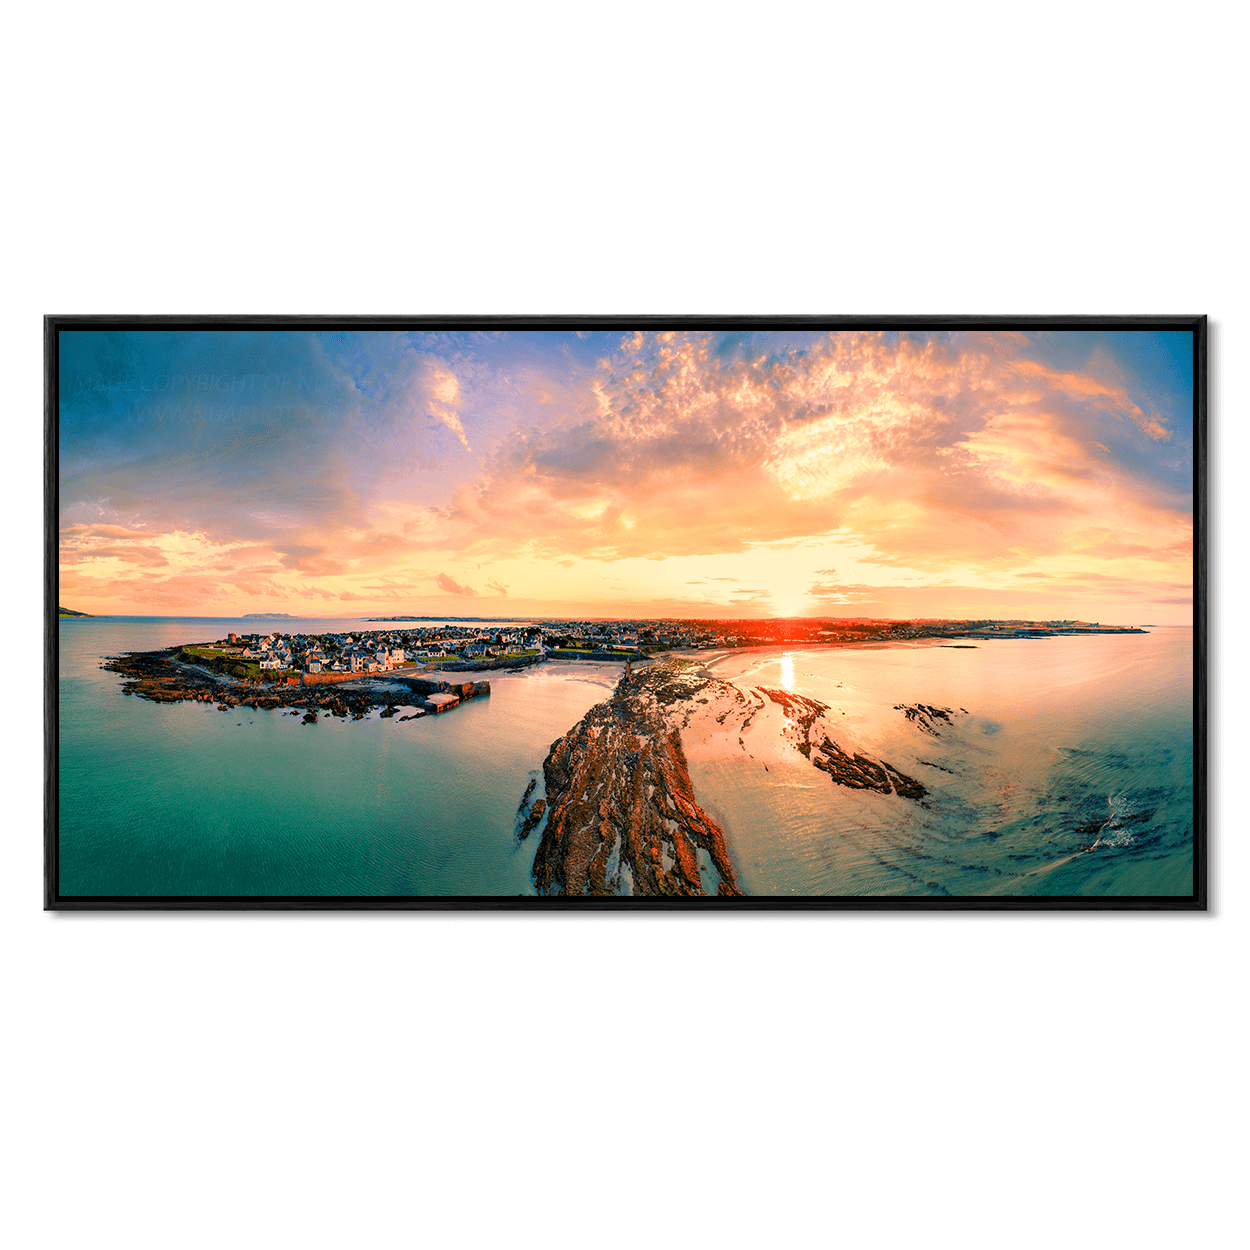 Nua Photography Limited Edition Rush Harbour & North Beach Aerial Sunset View 62